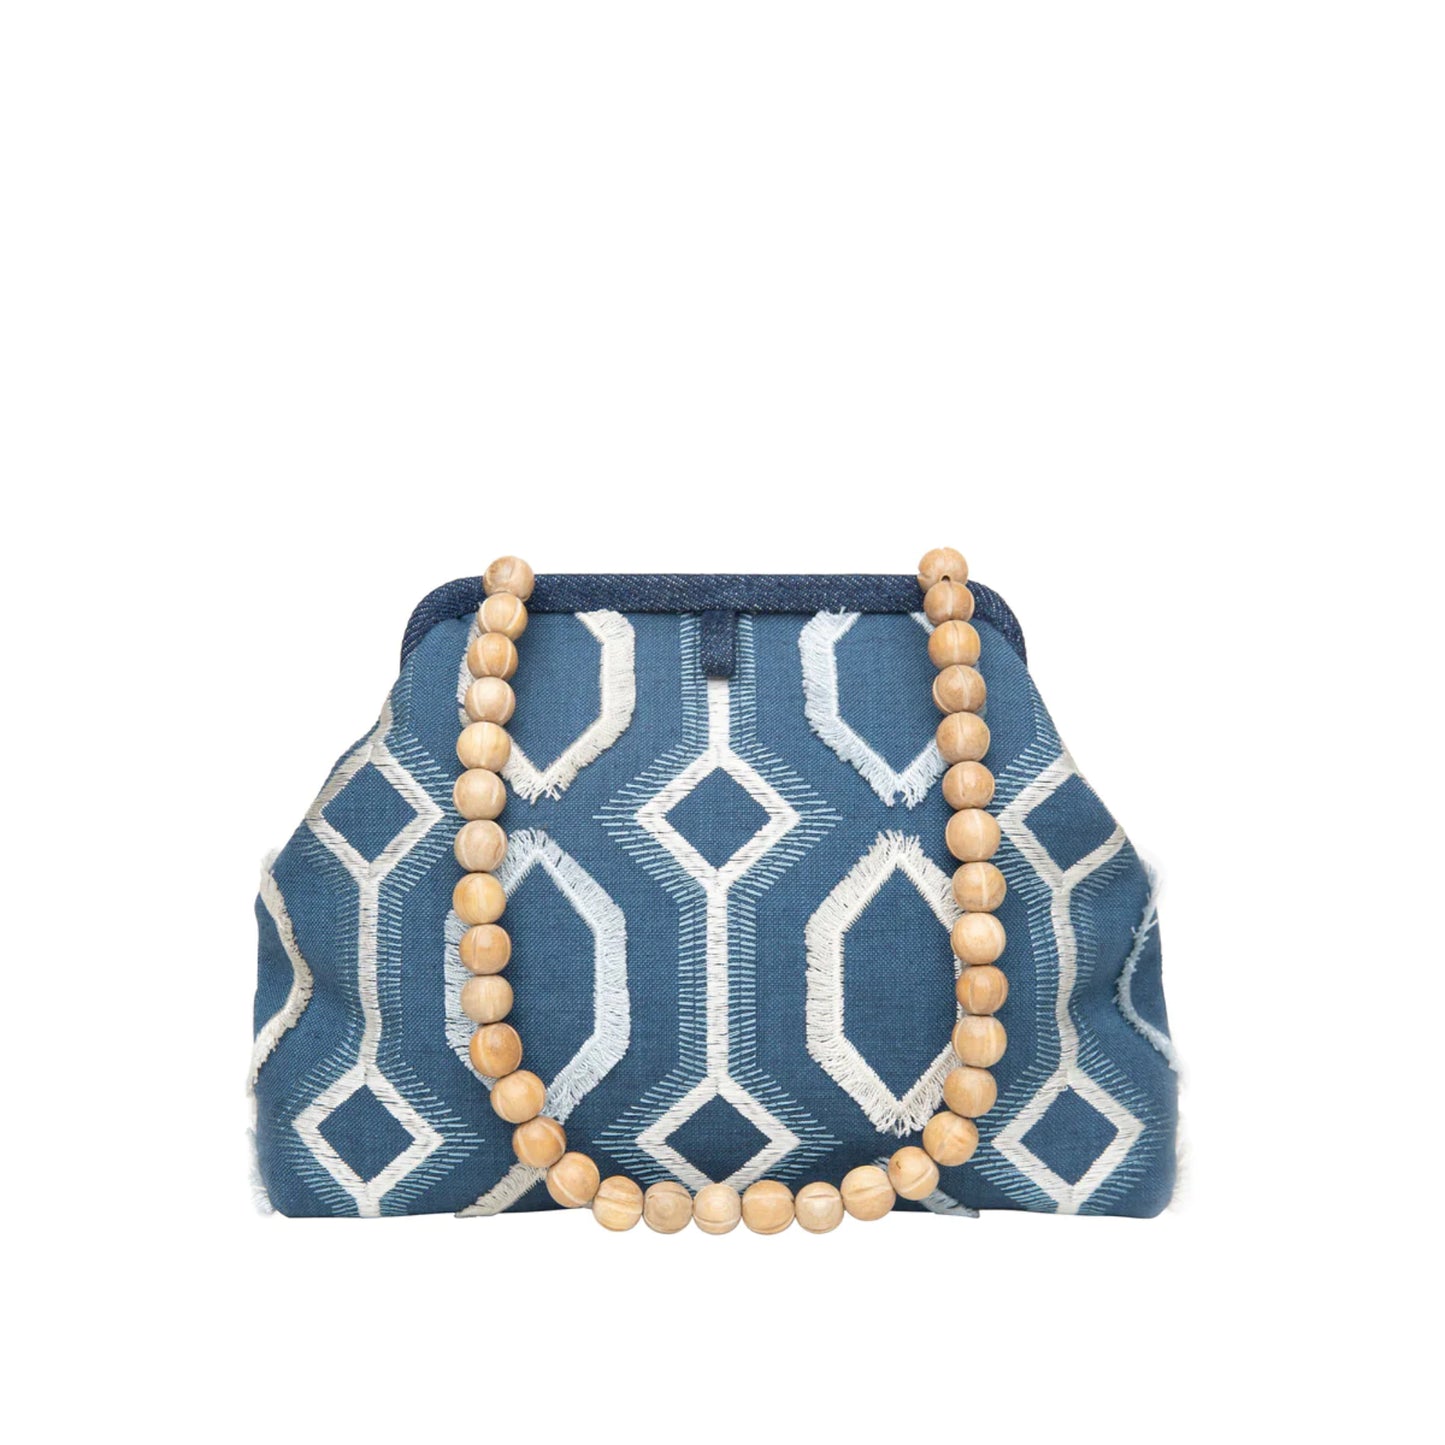 Marian Paquette Danielle Embroidered Navy Blue / Baby Blue